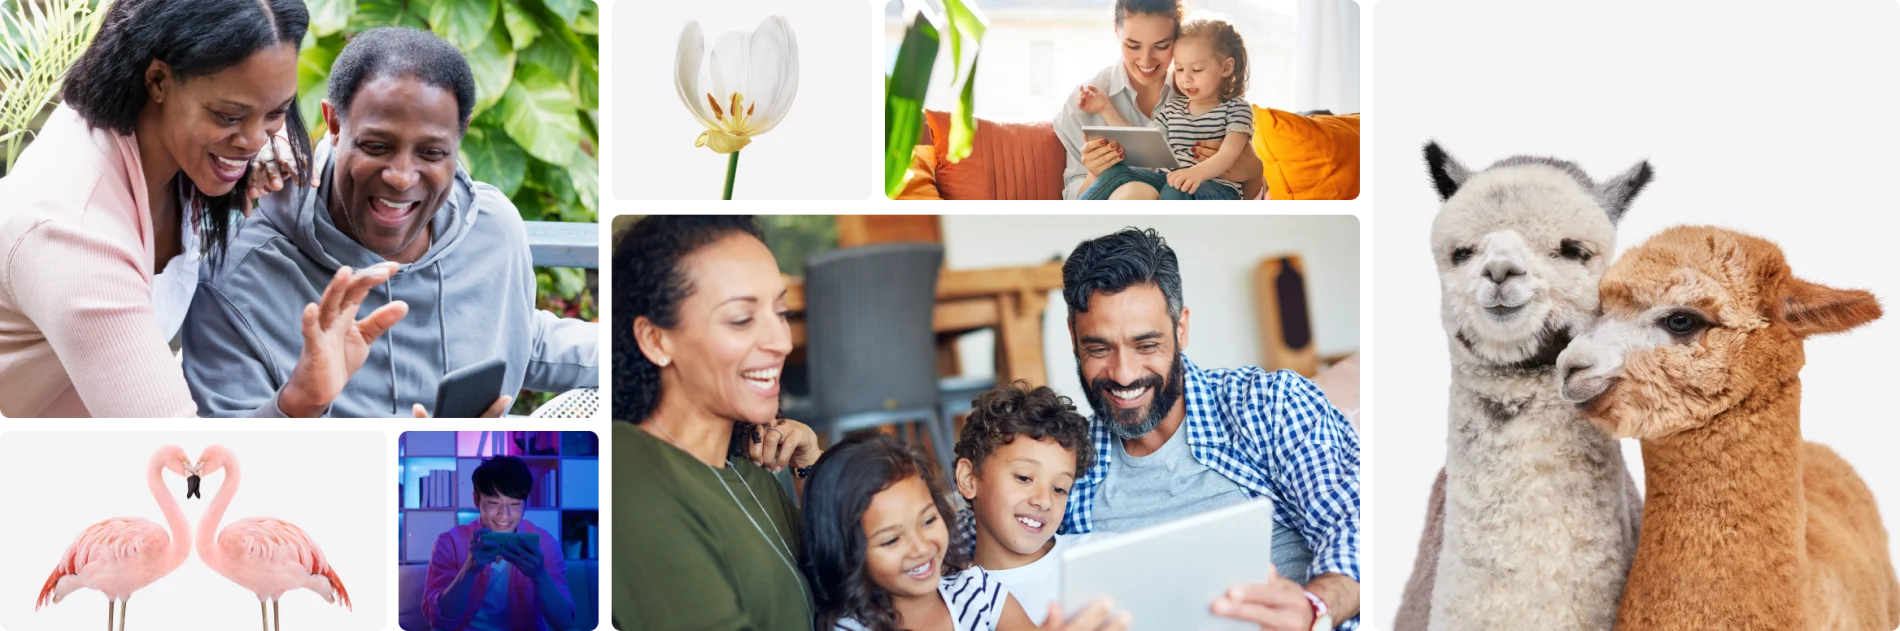 Multiple images of happy telus customers enjoying the benefits of our superior products. Also images of TELUS mascots, including lammas, flamingoes and flowers